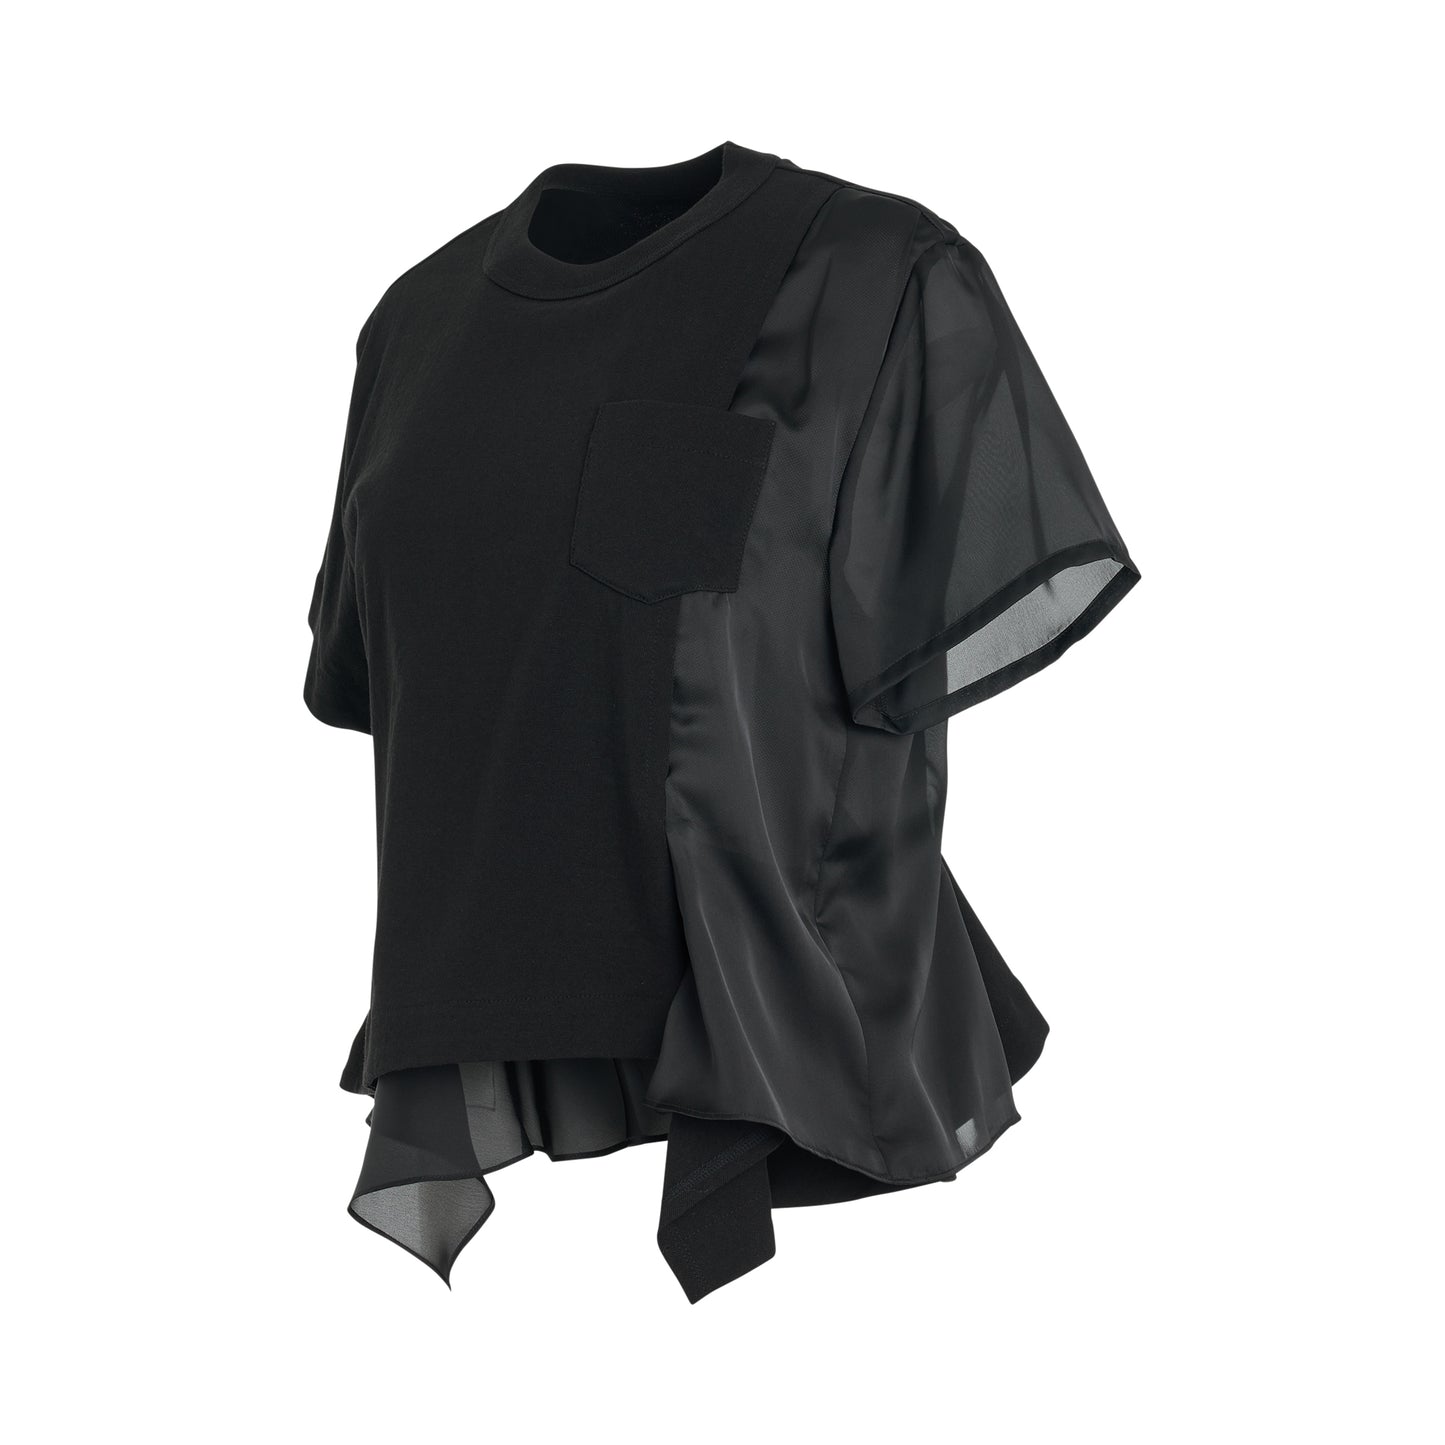 Cotton Layered T-Shirt in Black